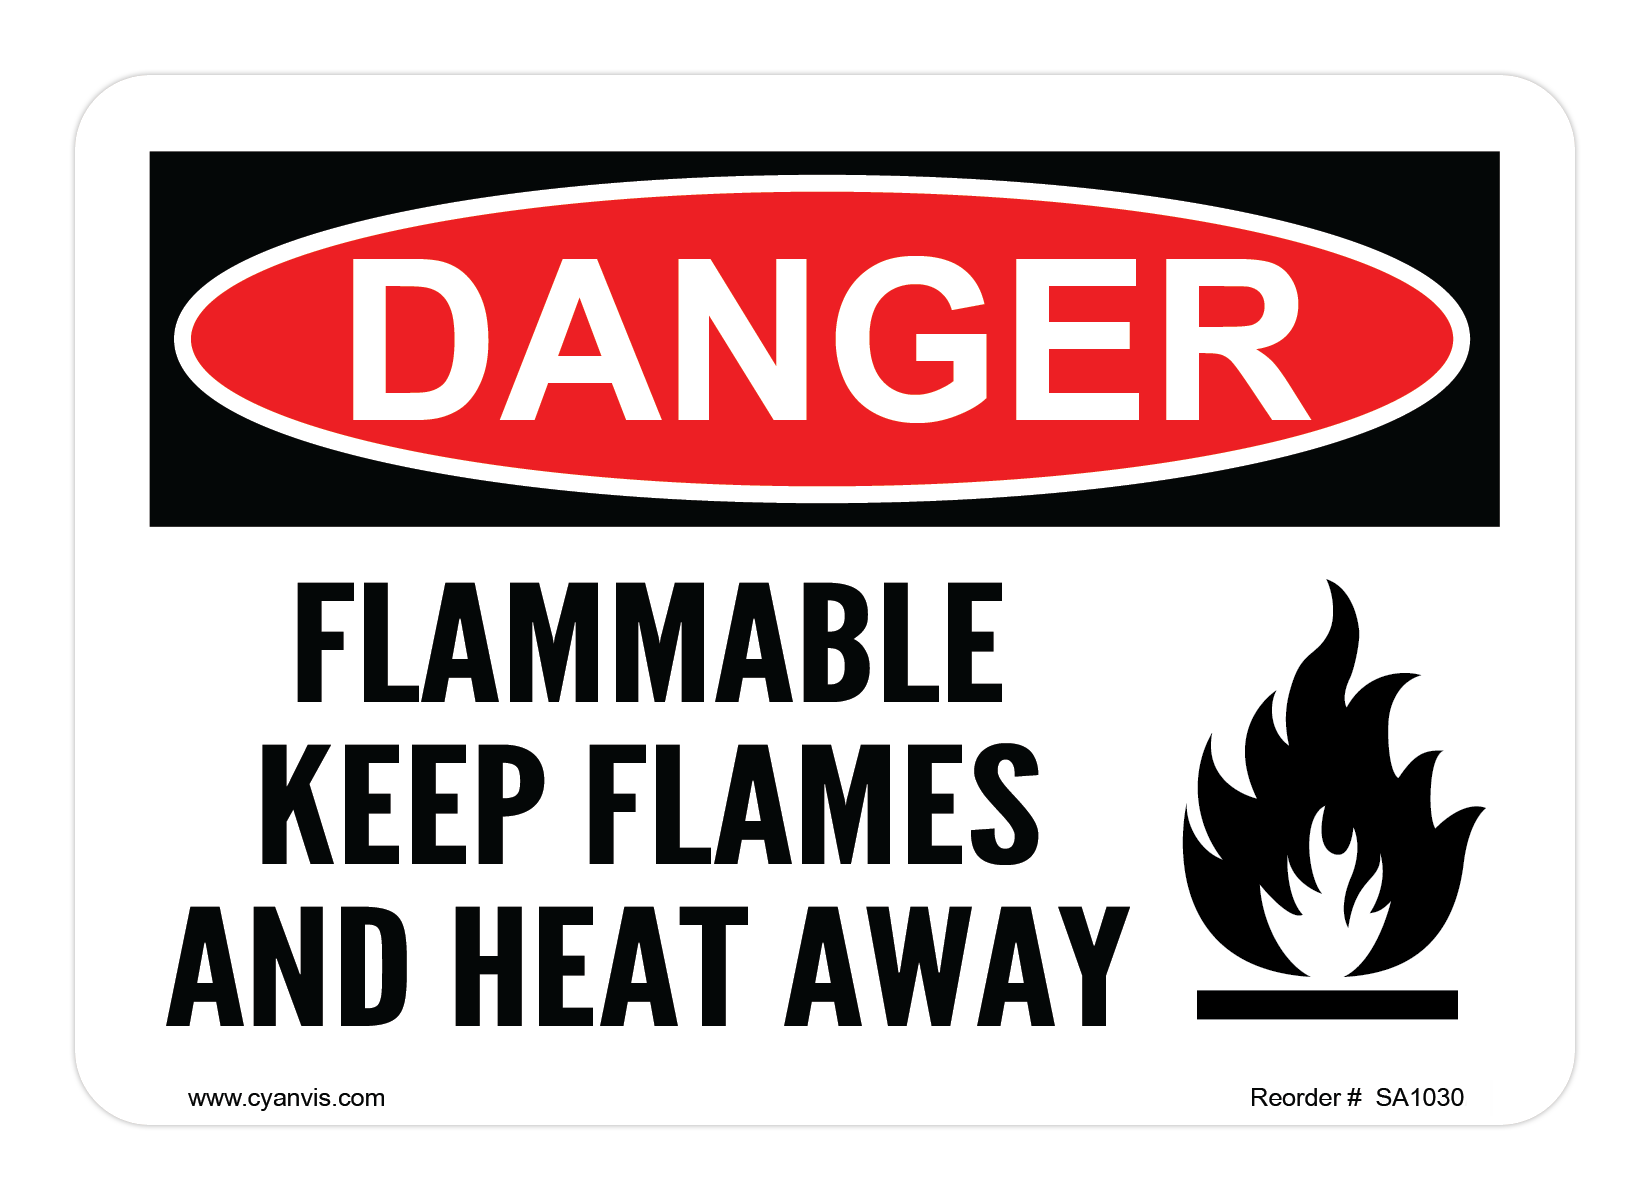 Safety Sign: Danger - FLAMMABLE KEEP FLAMES AND HEAT AWAY - CYANvisuals